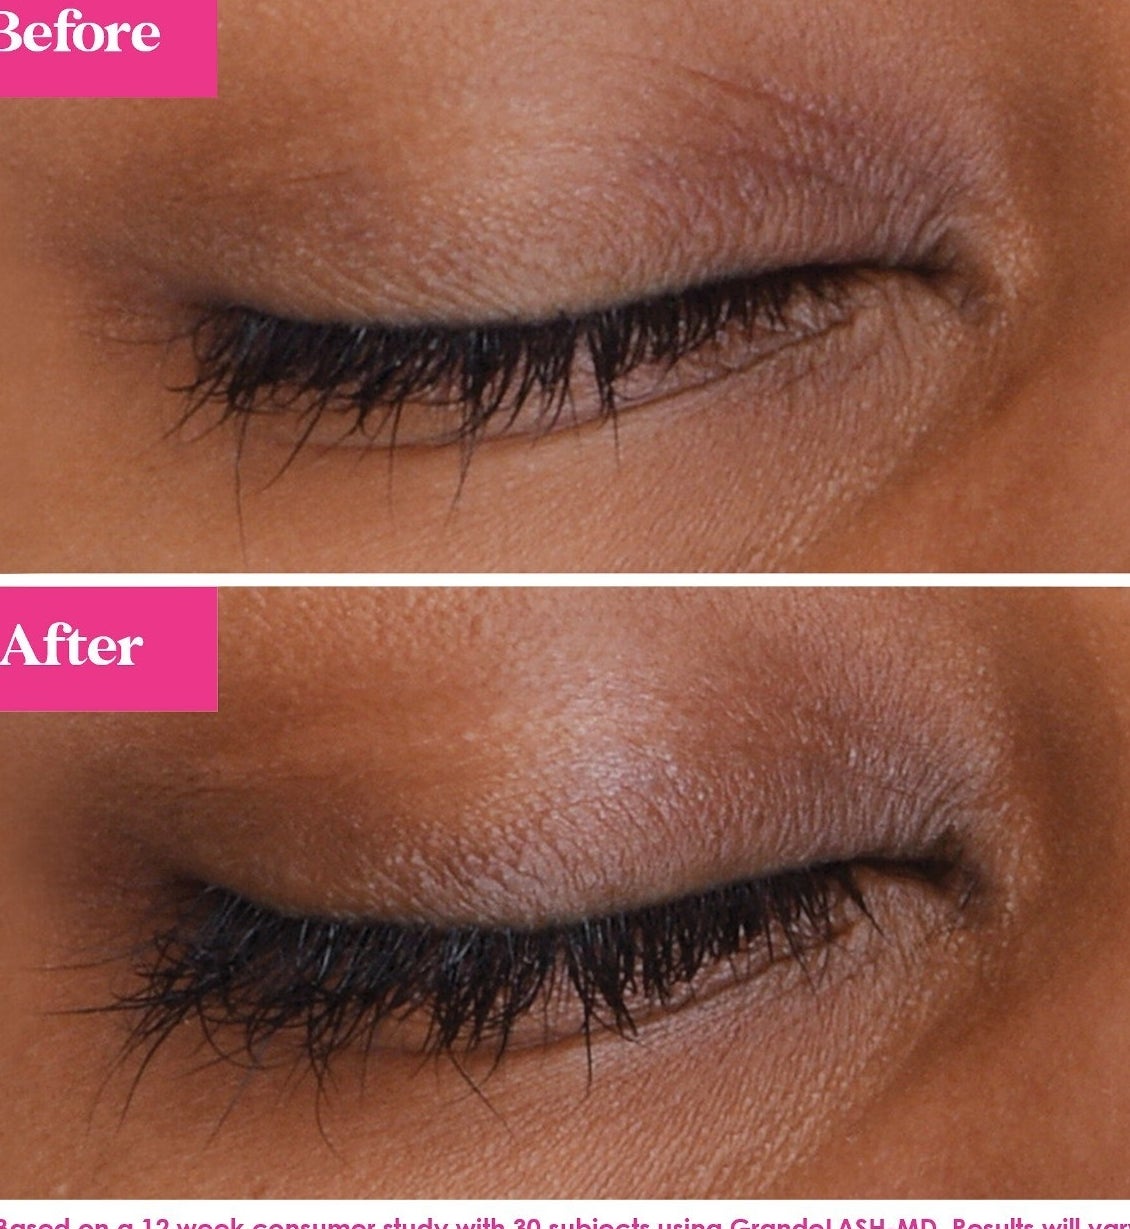 a before and after where the after shows lashes that are fuller, longer, and darker